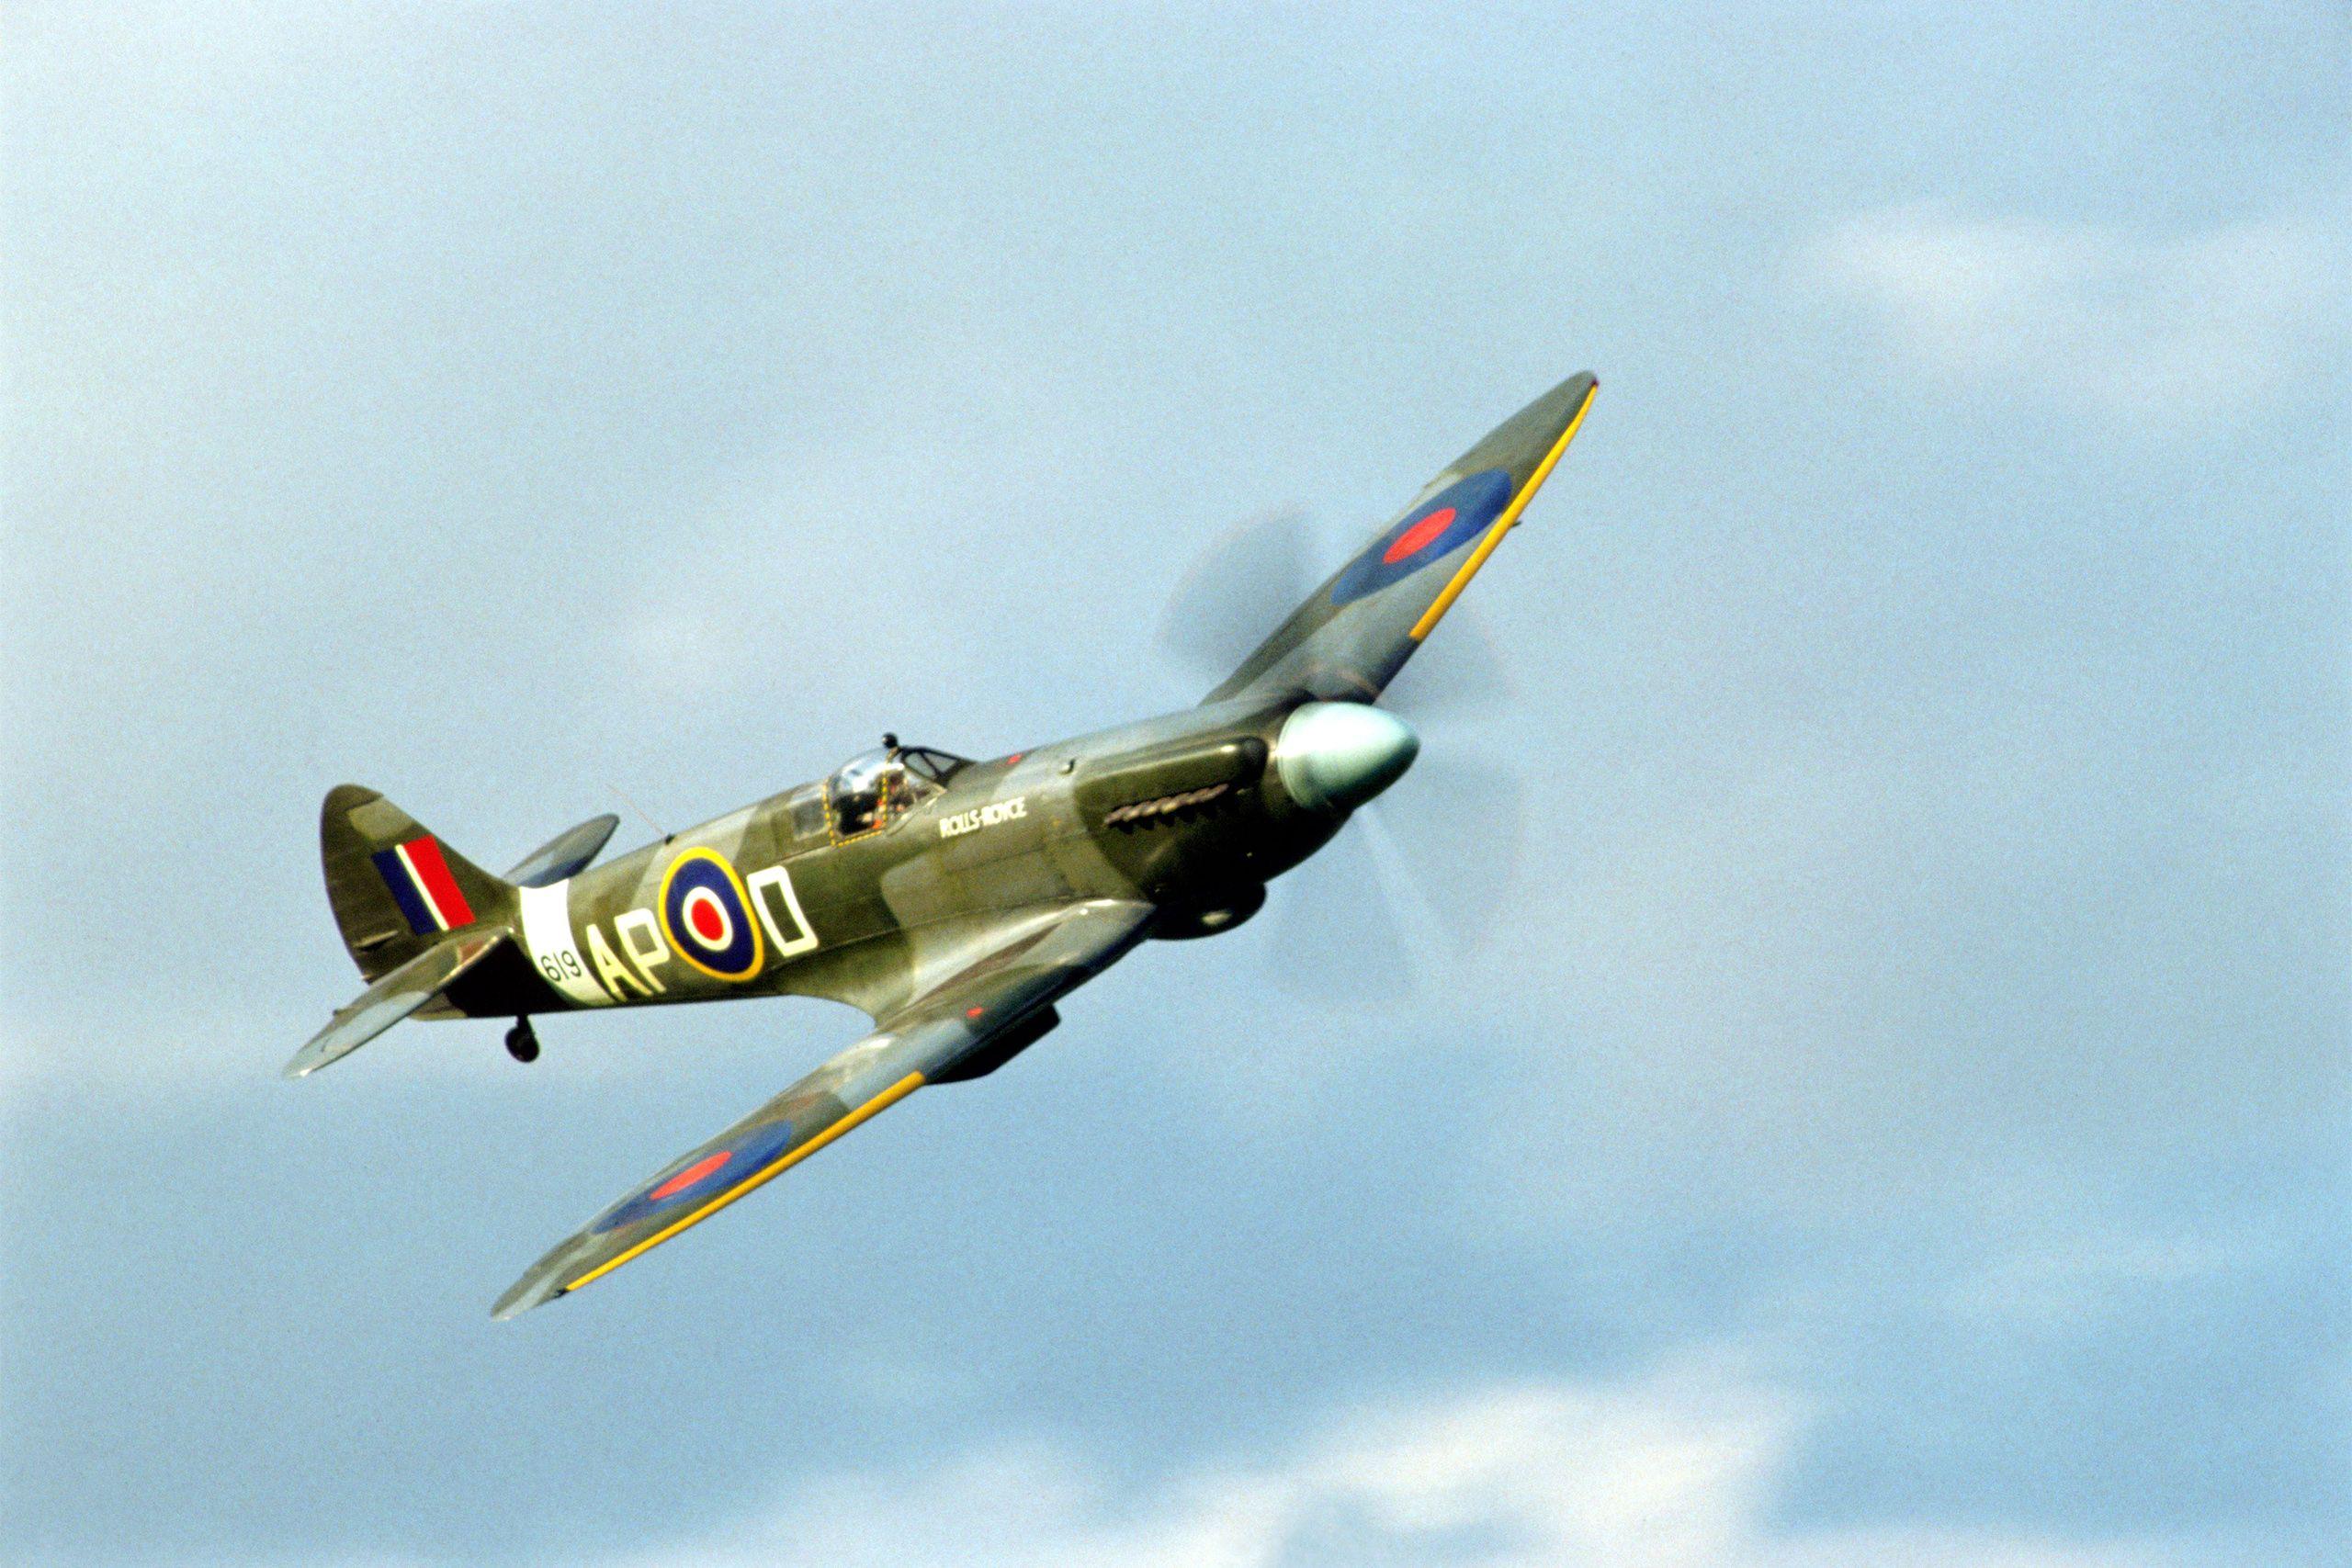 Spitfire Plane Logo - The Spy Behind the Plane That Saved Britain